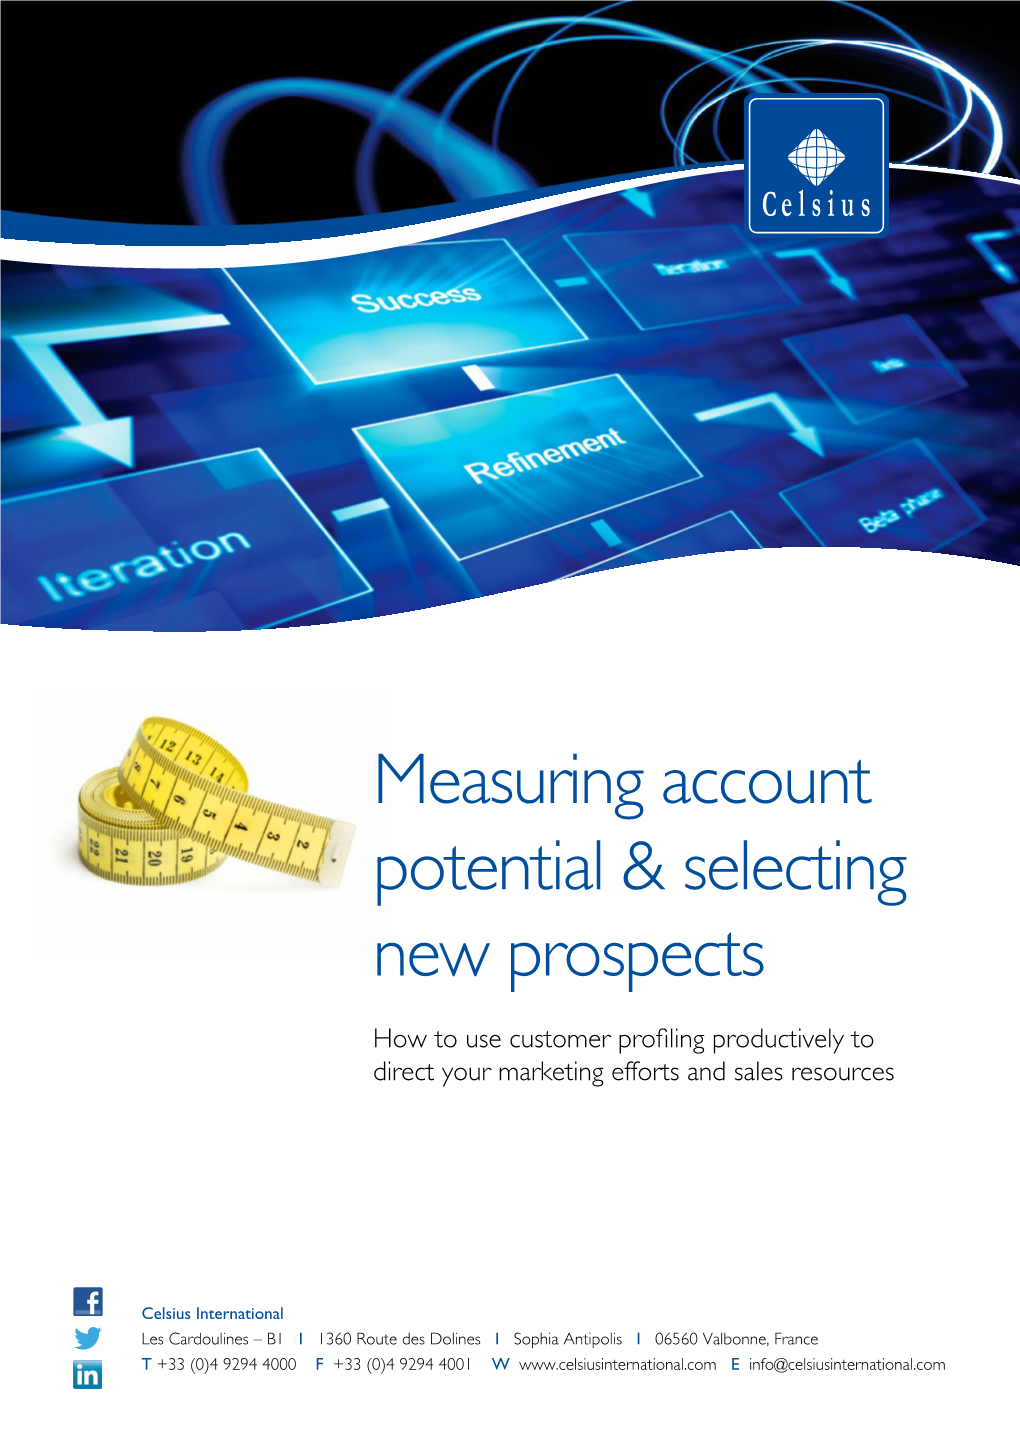 Measuring Account Potential & Selecting New Prospects